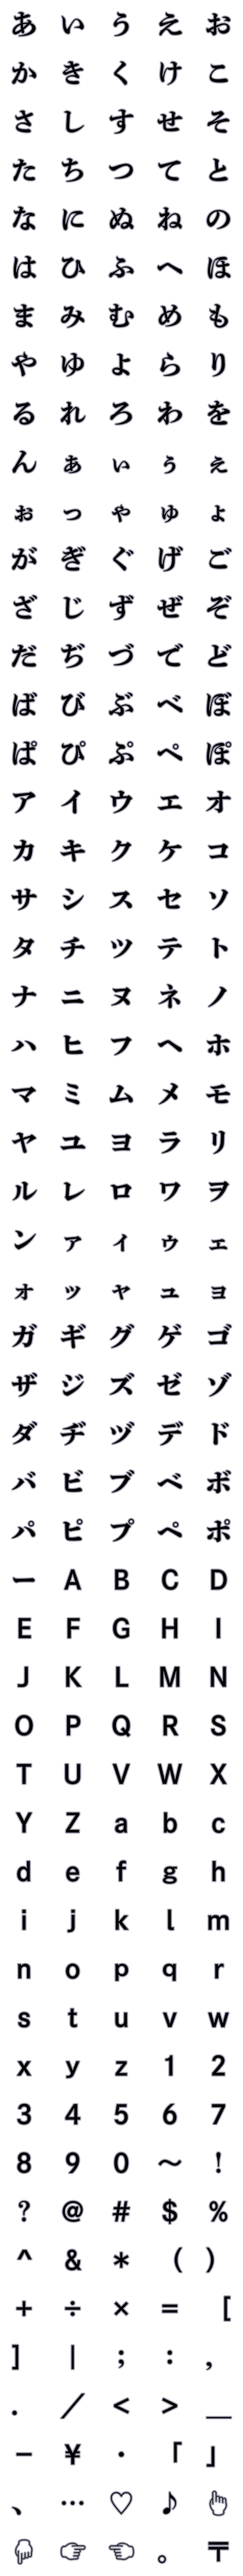 [LINE絵文字]秀英体でデコ文字「秀英アンチック」の画像一覧